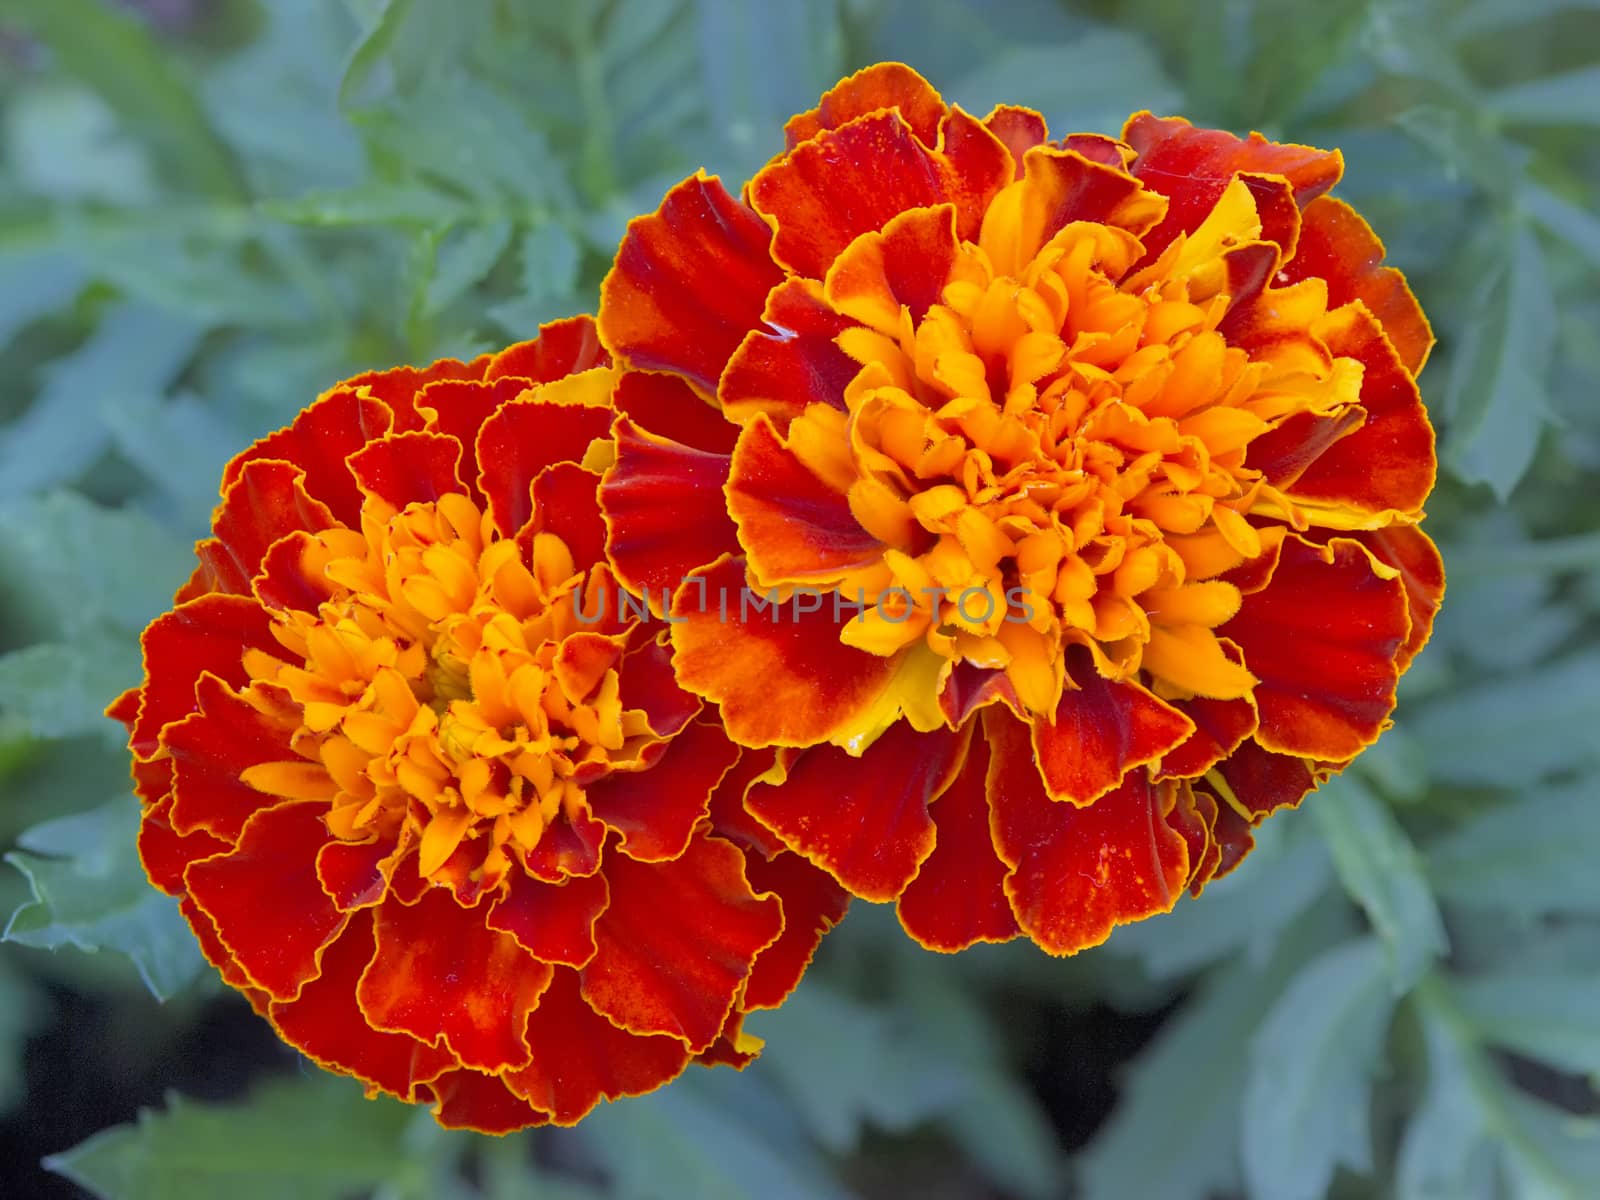 Two marigold blooms by CharlieFloyd